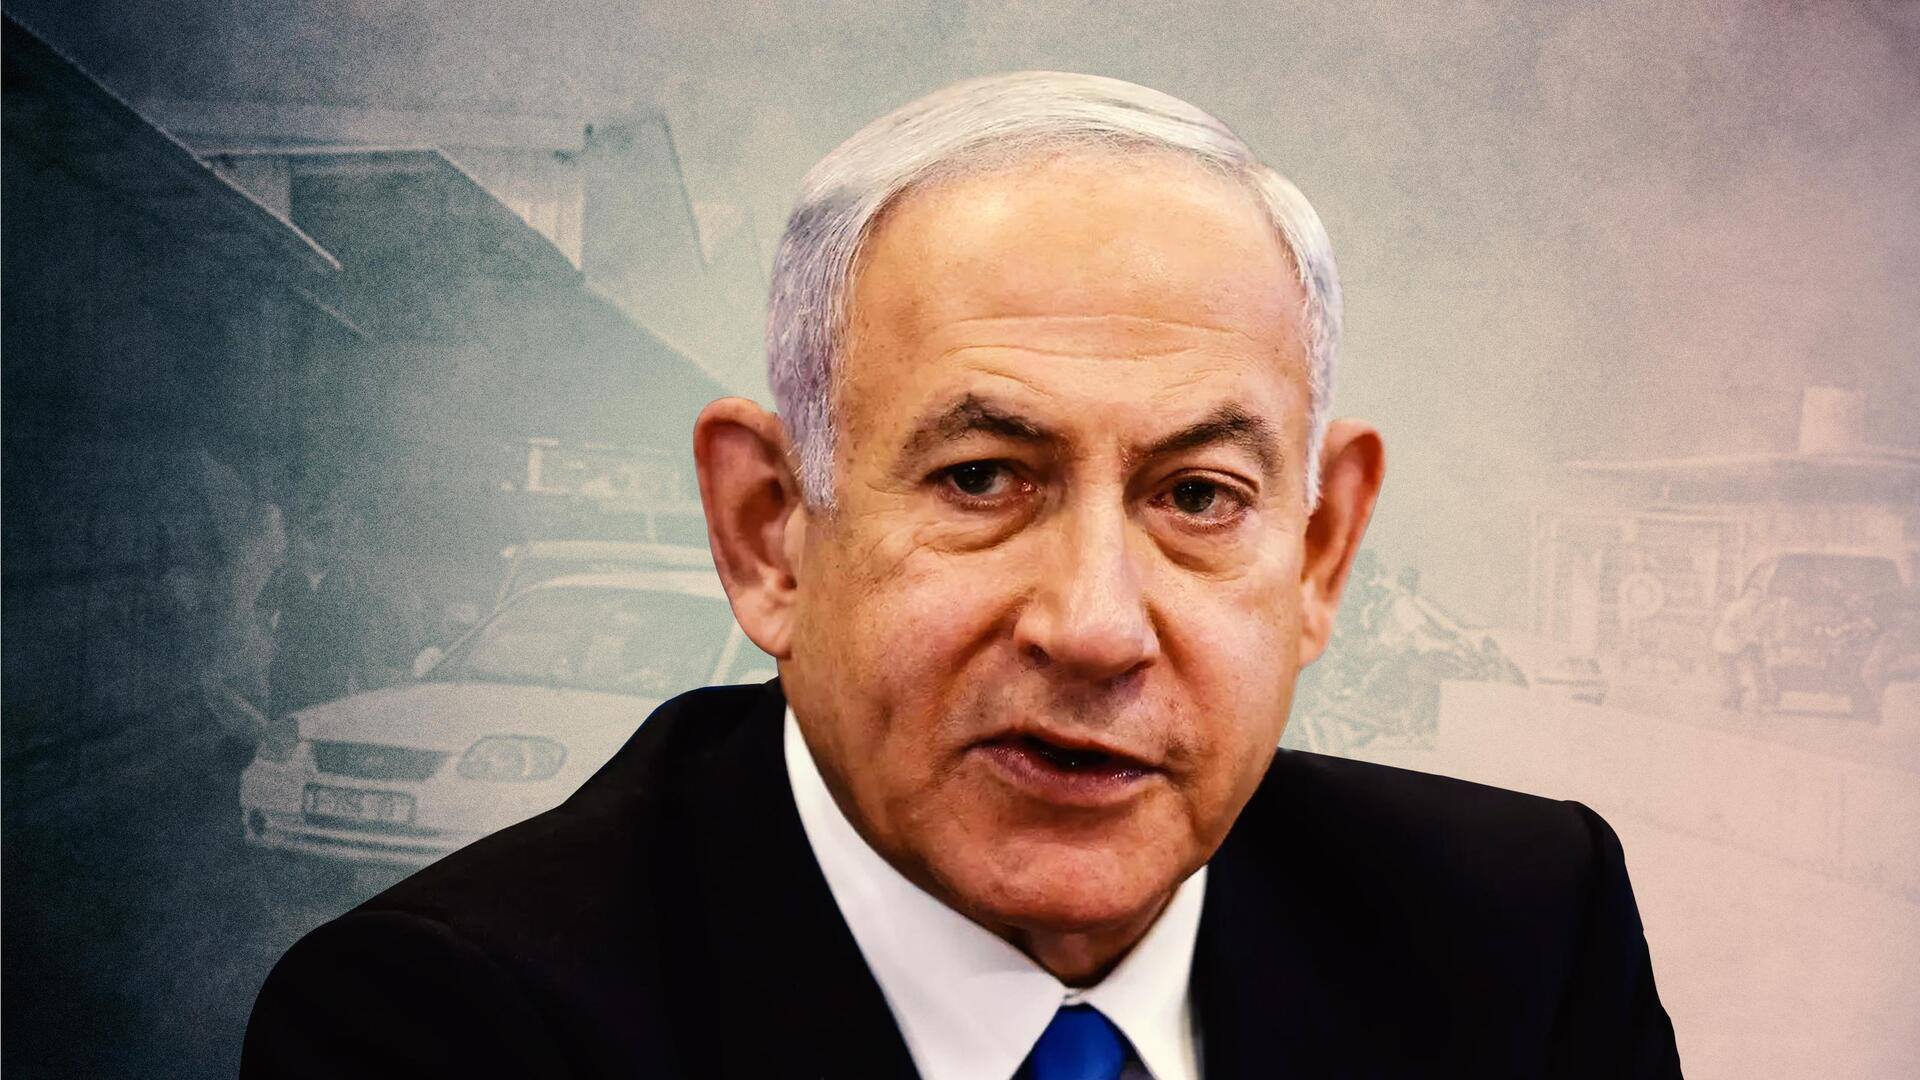 We are at war: Netanyahu after Hamas's attack on Israel